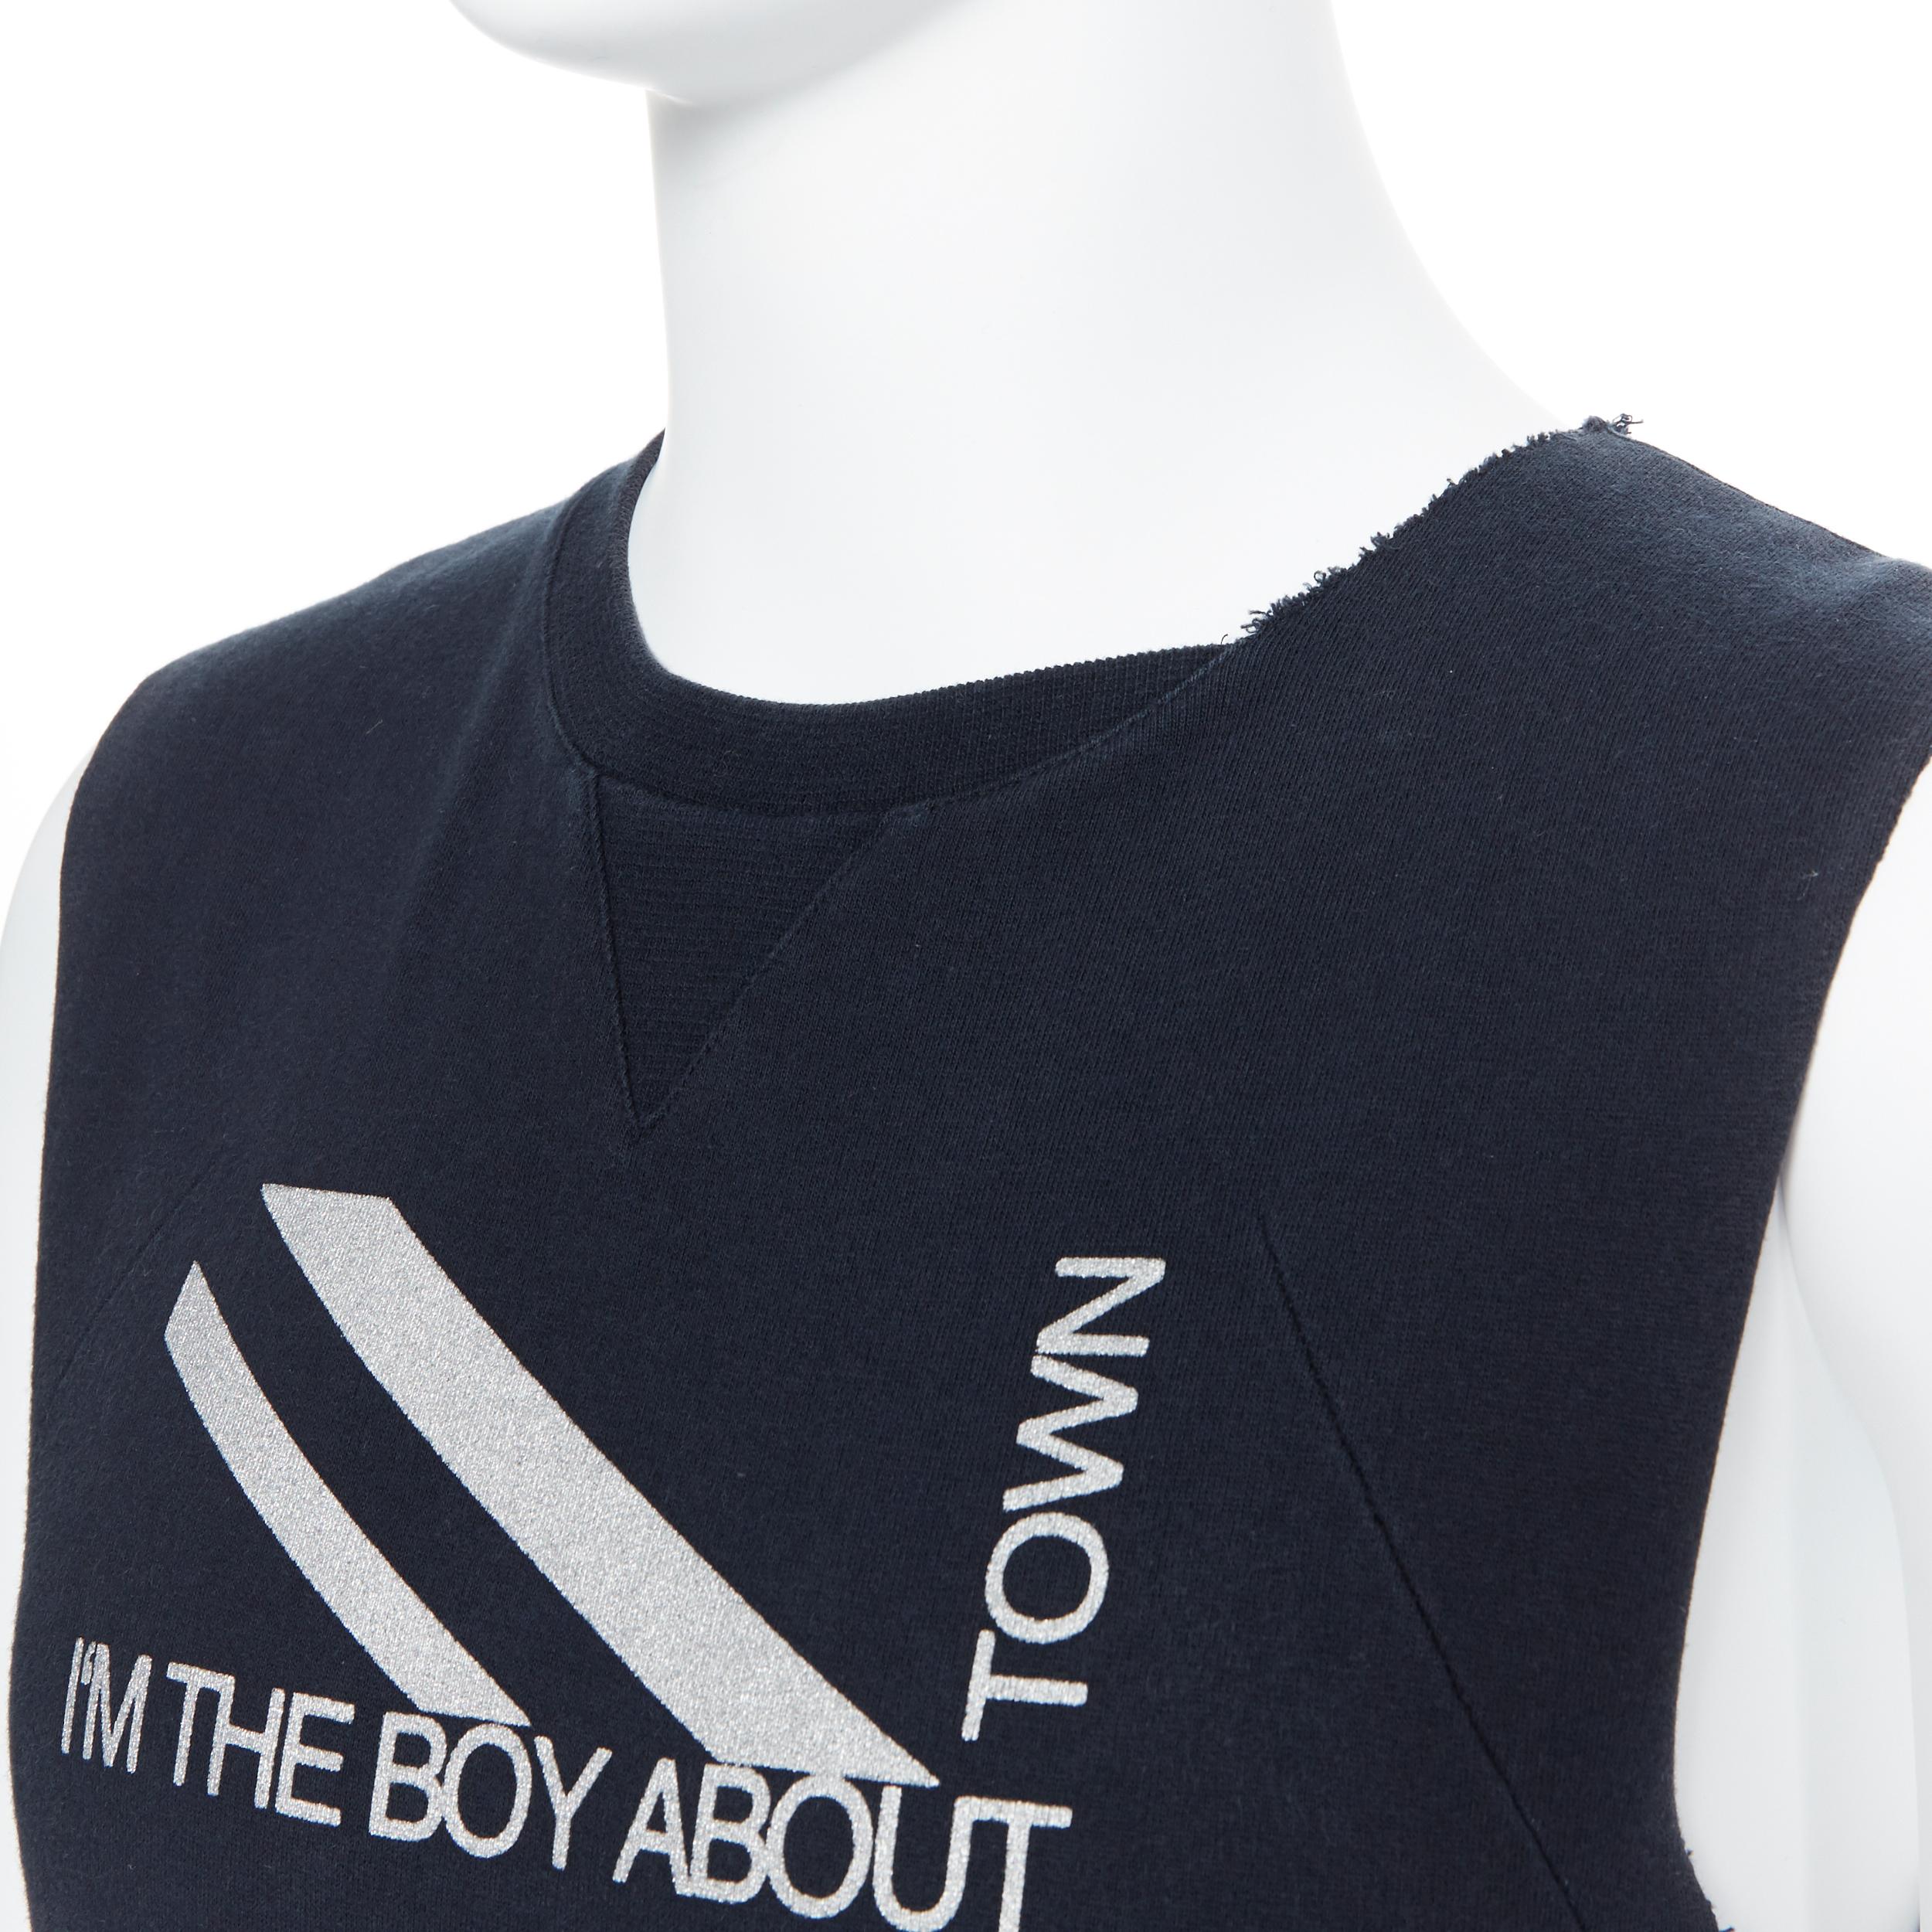 DIOR HOMME black Boy About Town print kangaroo pocket cut sleeveless vest  XS
Brand: Dior Homme
Model Name / Style: Sweater vest
Material: Cotton
Color: Black
Pattern: Solid
Extra Detail: Irregular raw cut collar and sleeves. Sleeveless. Crew neck